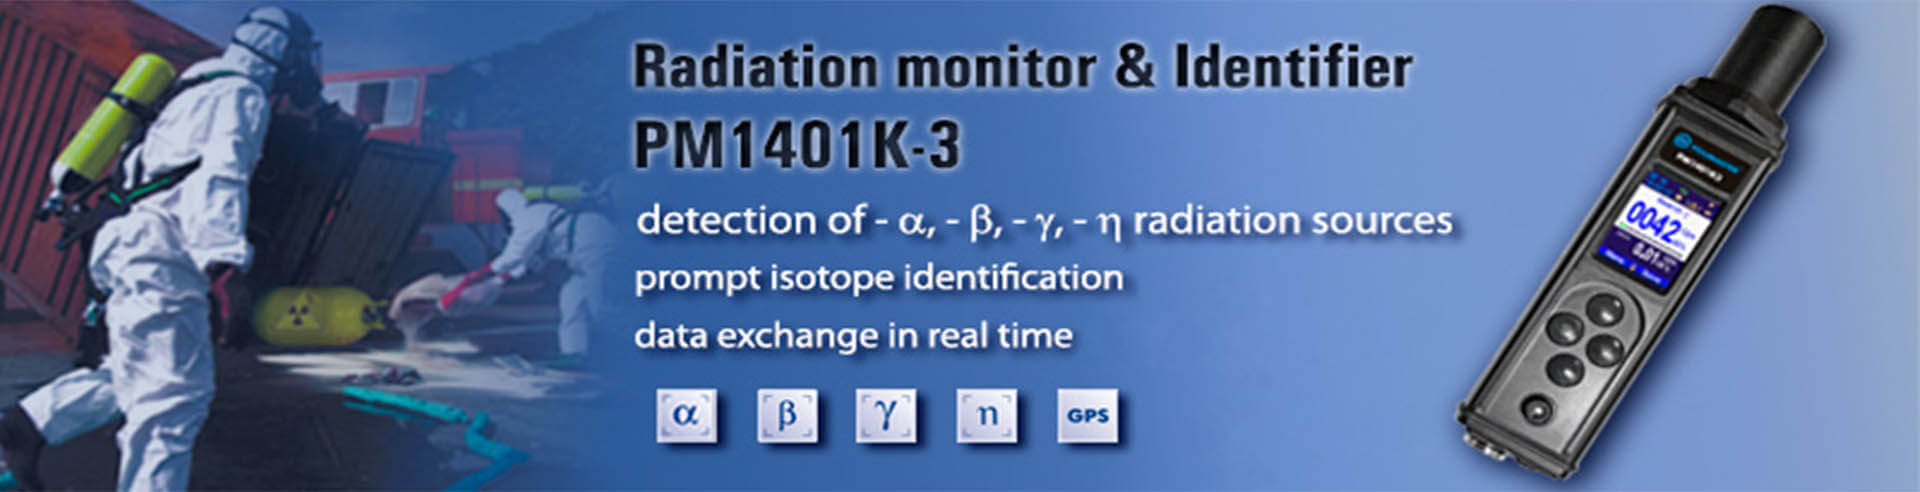 Radiation Monitoring Devices